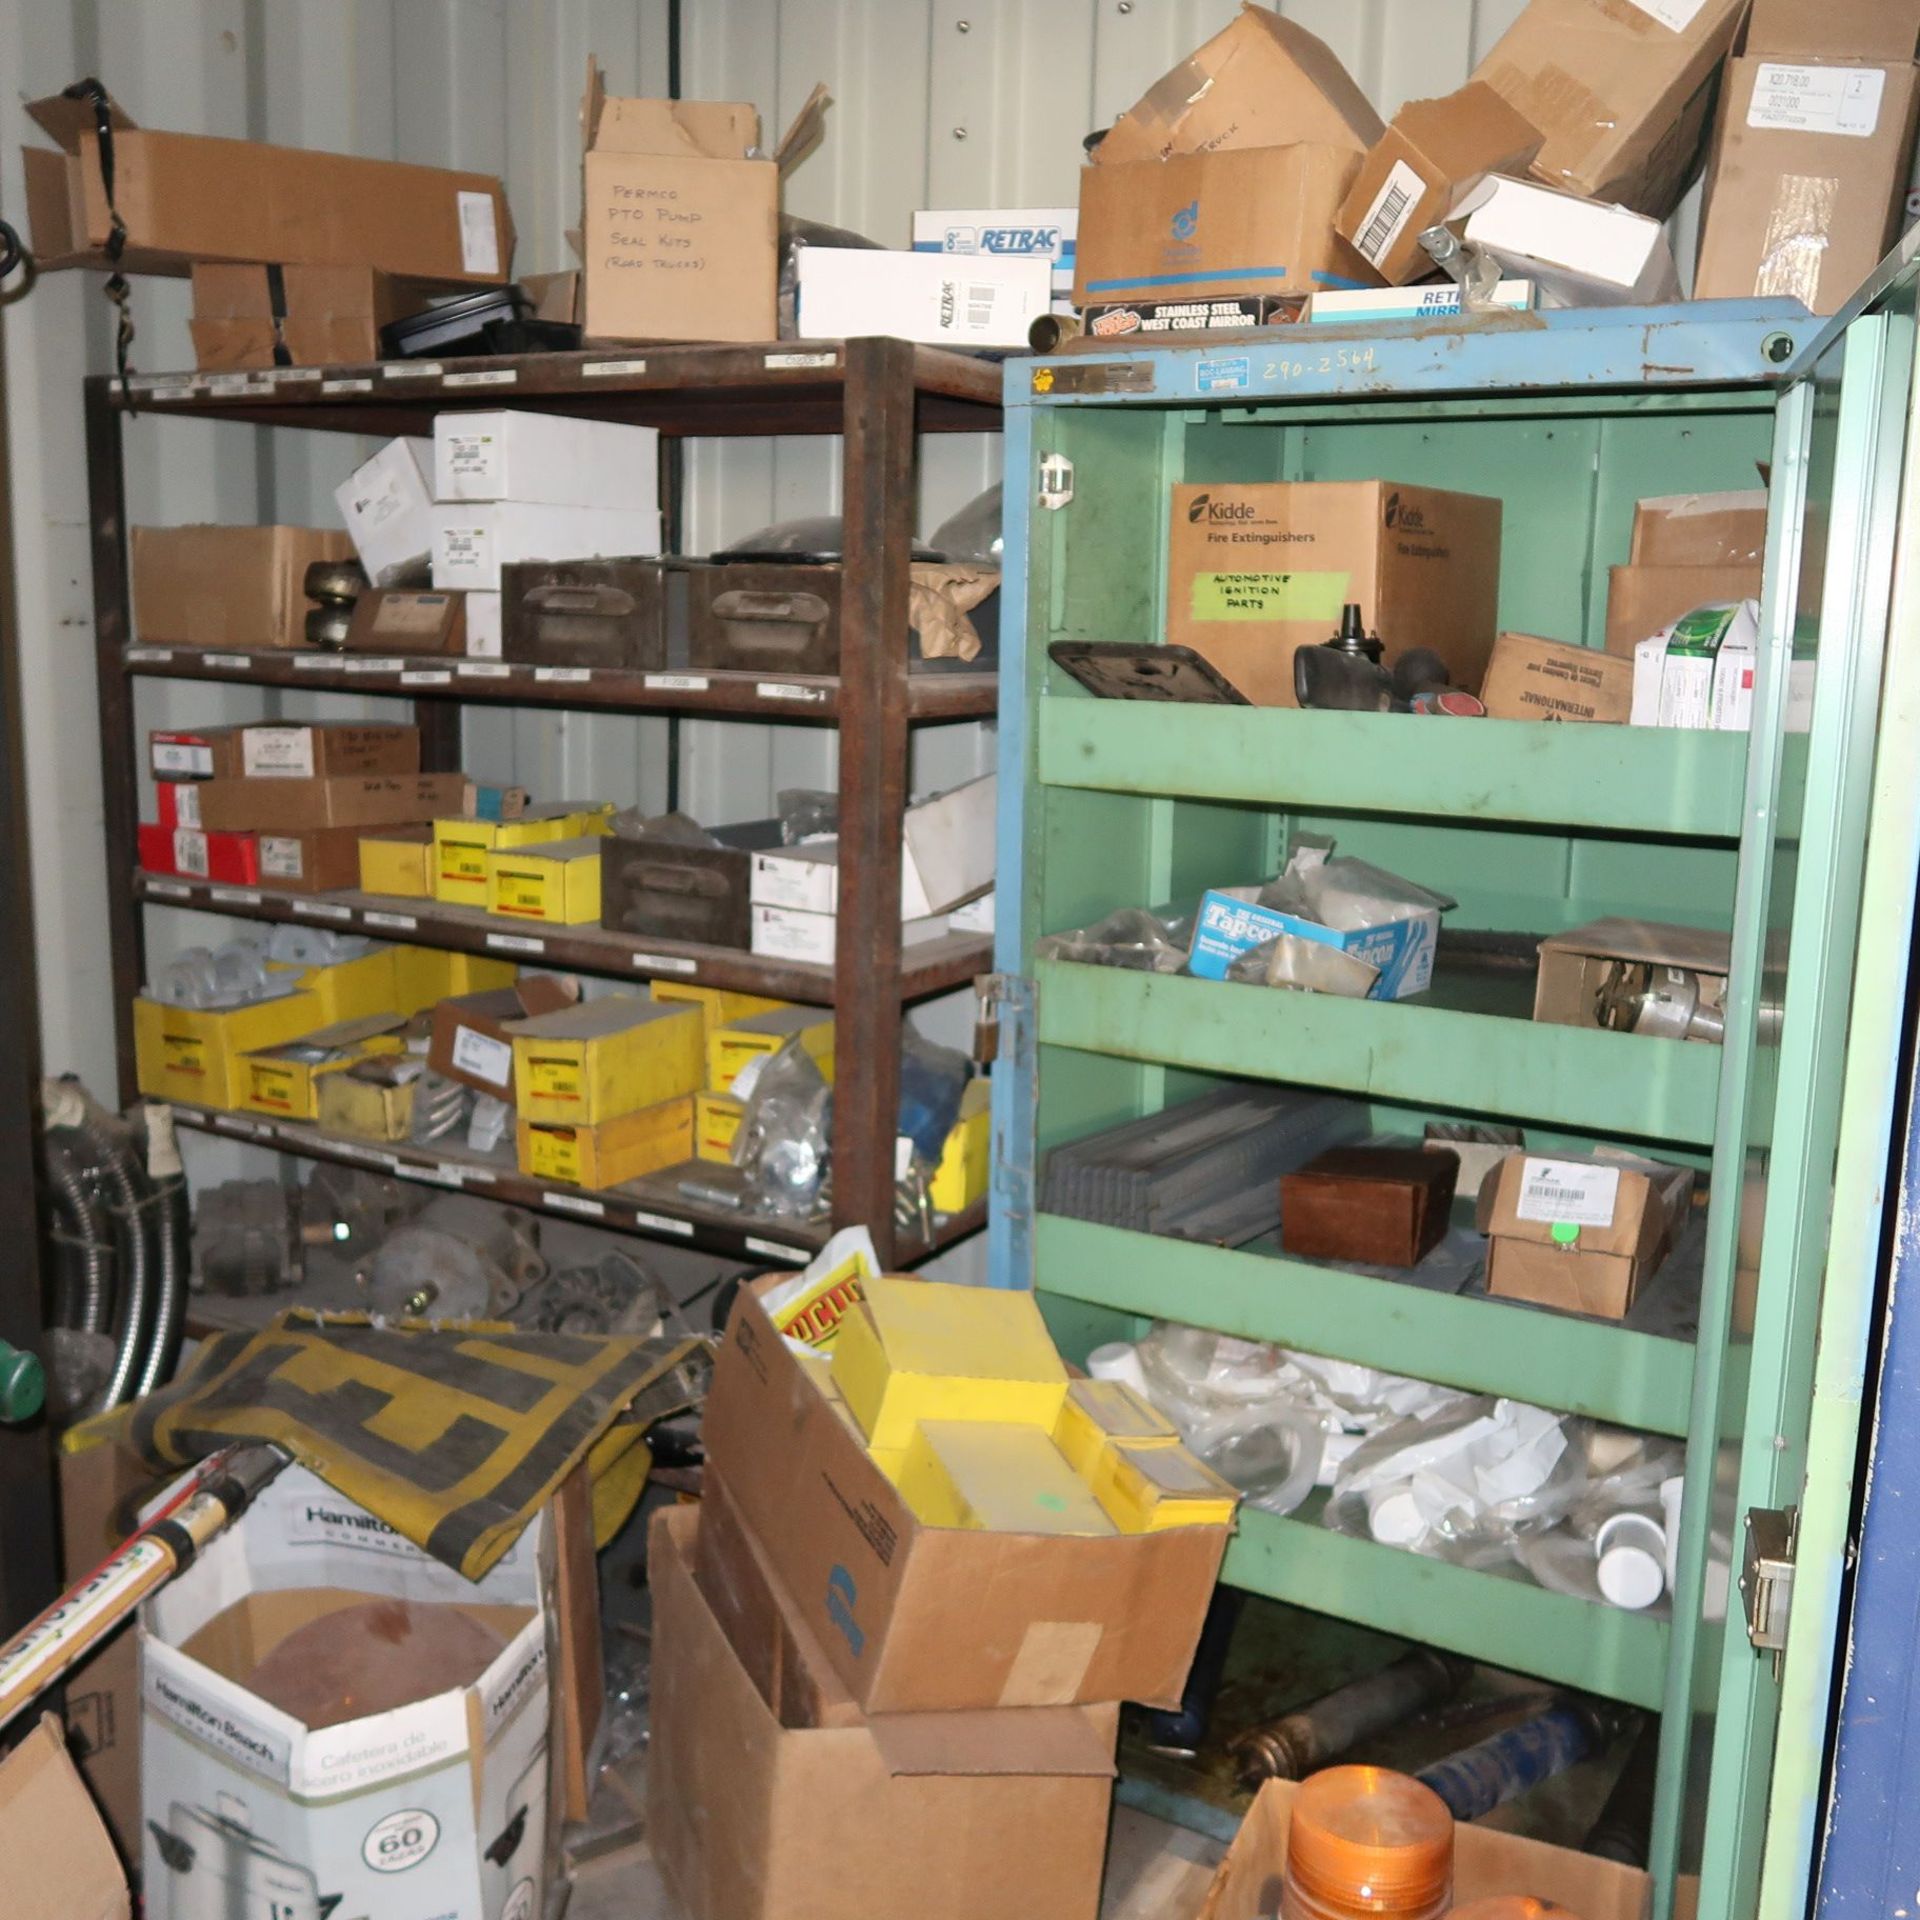 (LOT) CONTENTS OF CONTAINER INCLDUING CONSTRUCTION EQUIPMENT, PARTS, BRAKERS, SEALS, VALVES, - Image 3 of 3